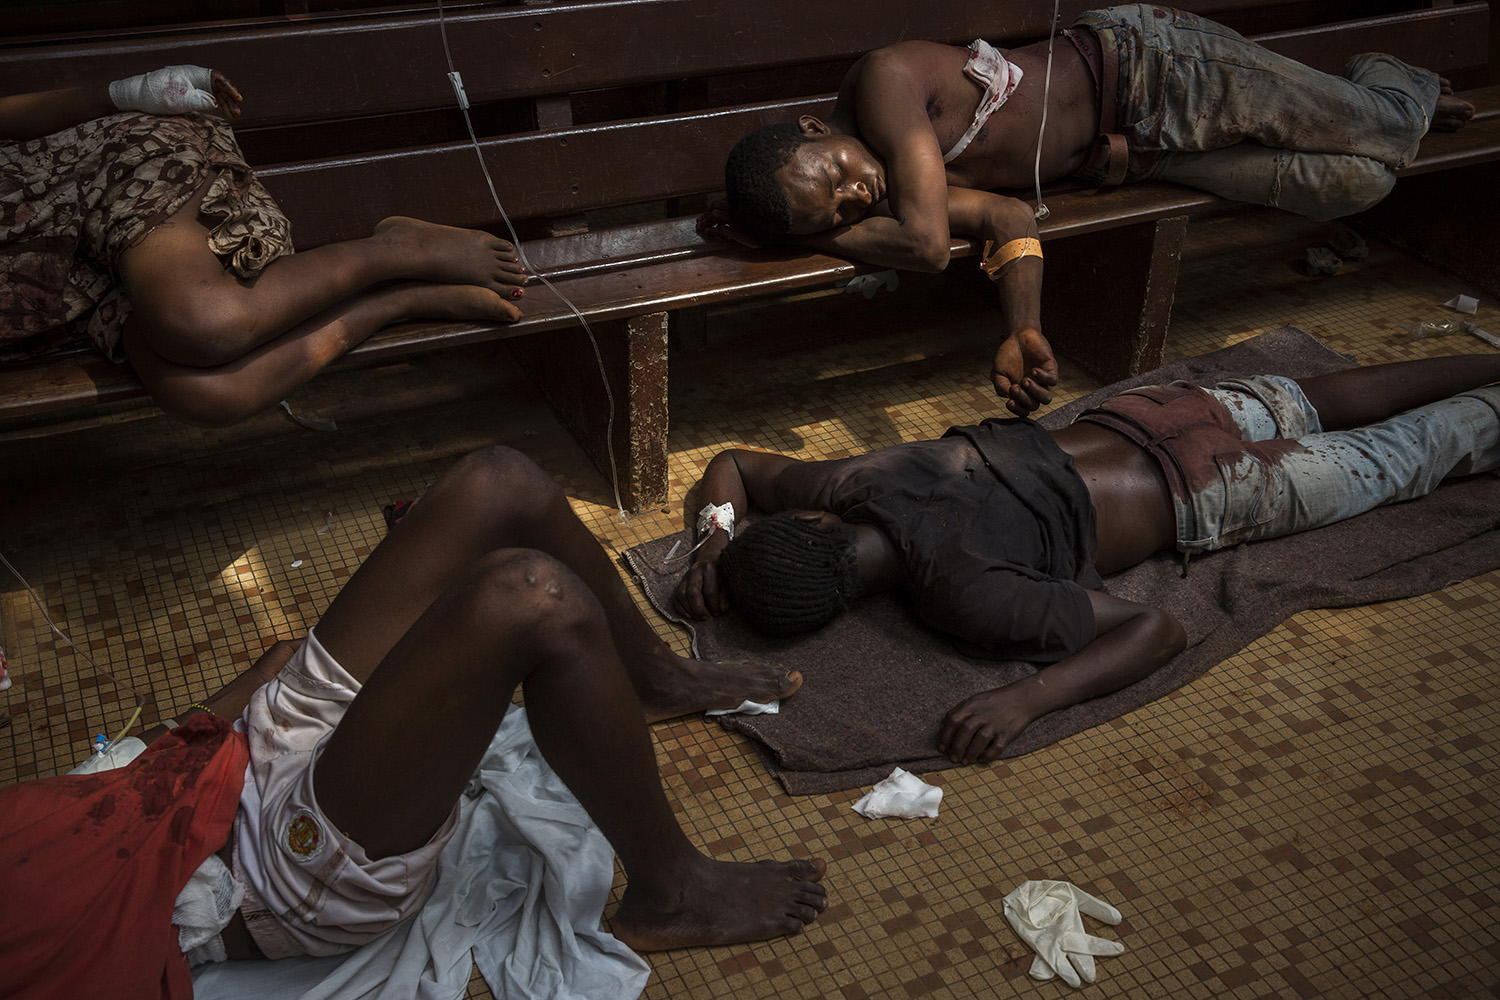 Wounded people both christians and muslims at the community hospital in Bangui. Aid workers and medical staff treated about 100 people and about 50 bodies were brought  to the hospital morgue.